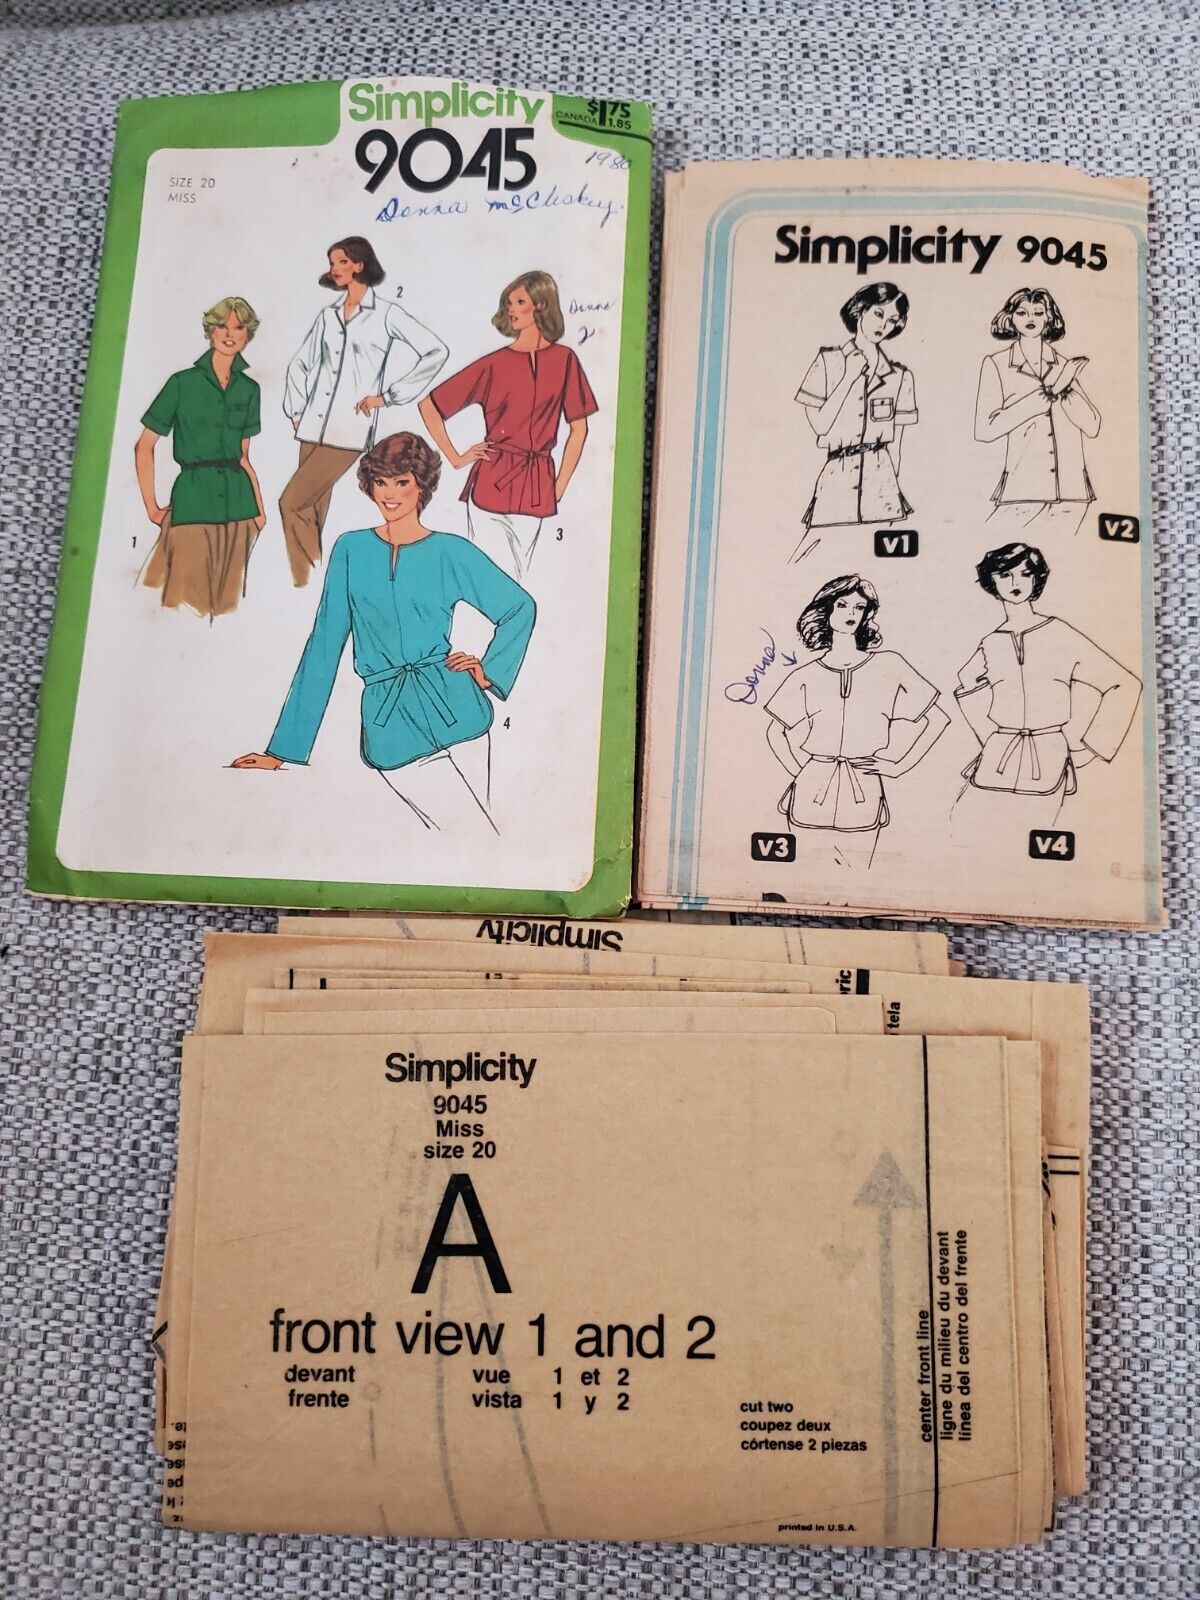 1979 Simplicity Sewing Pattern 9045 Womens Tunic 4 Styles Size 20 Vintage 